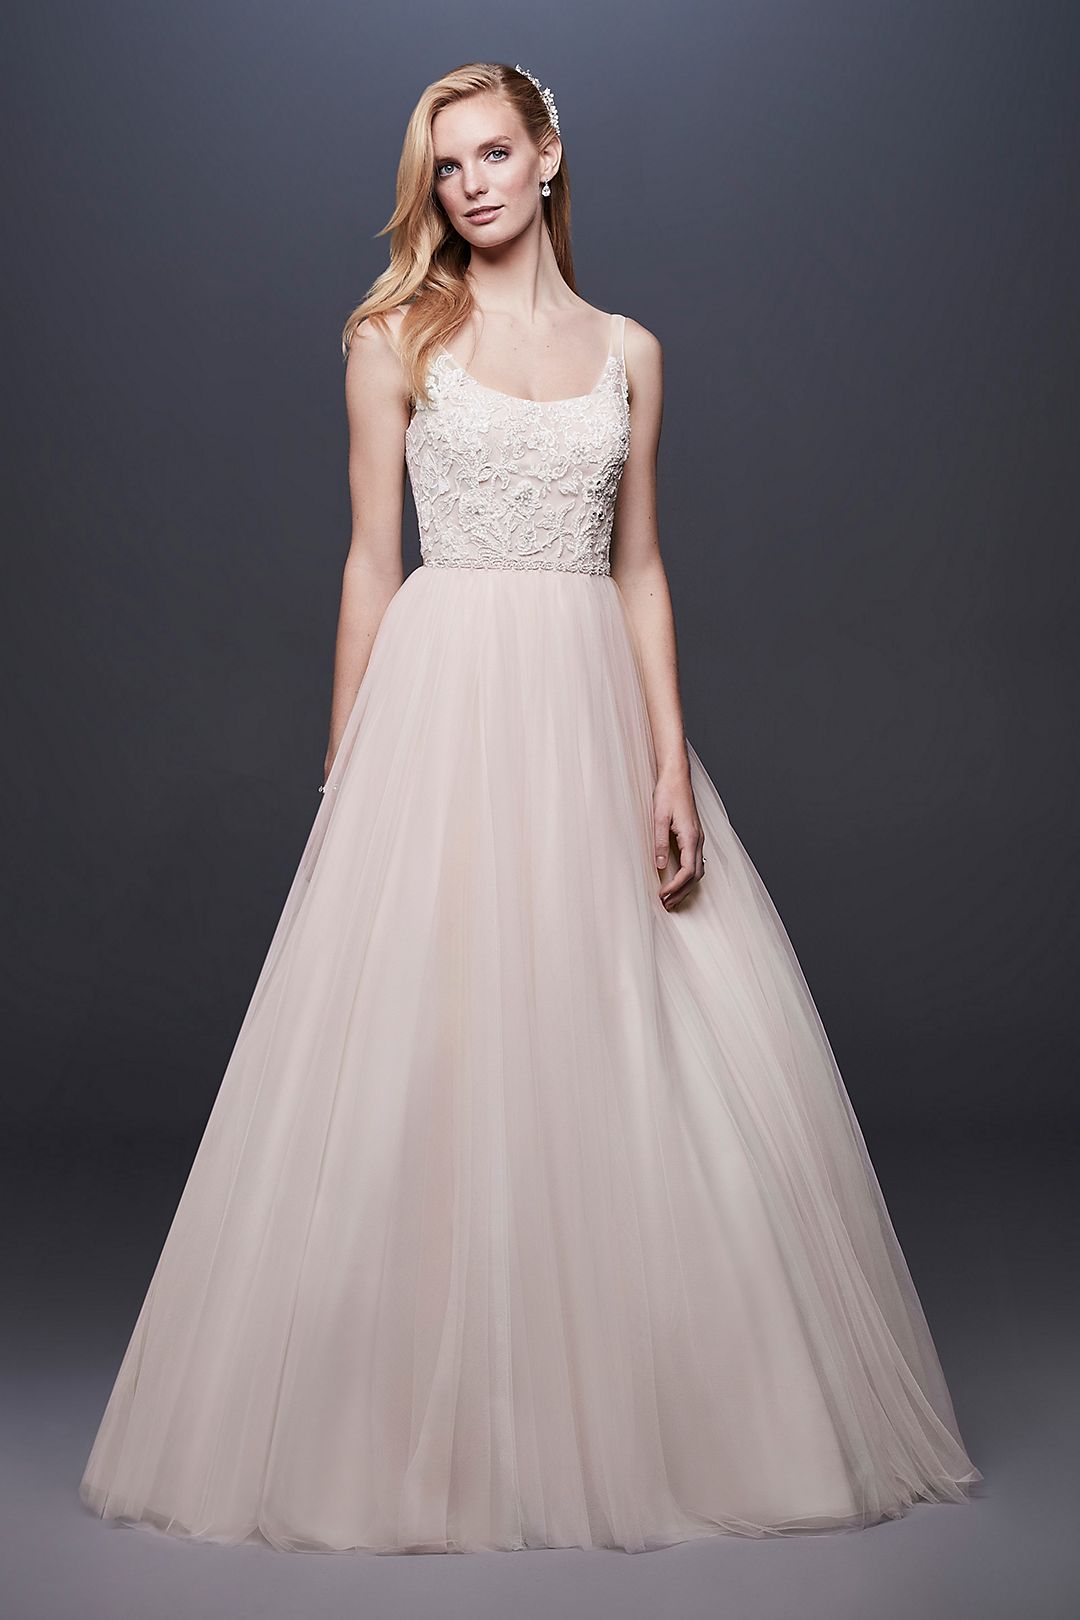 As Is Lace Tulle Beaded Ball Gown Wedding Dress Image 4